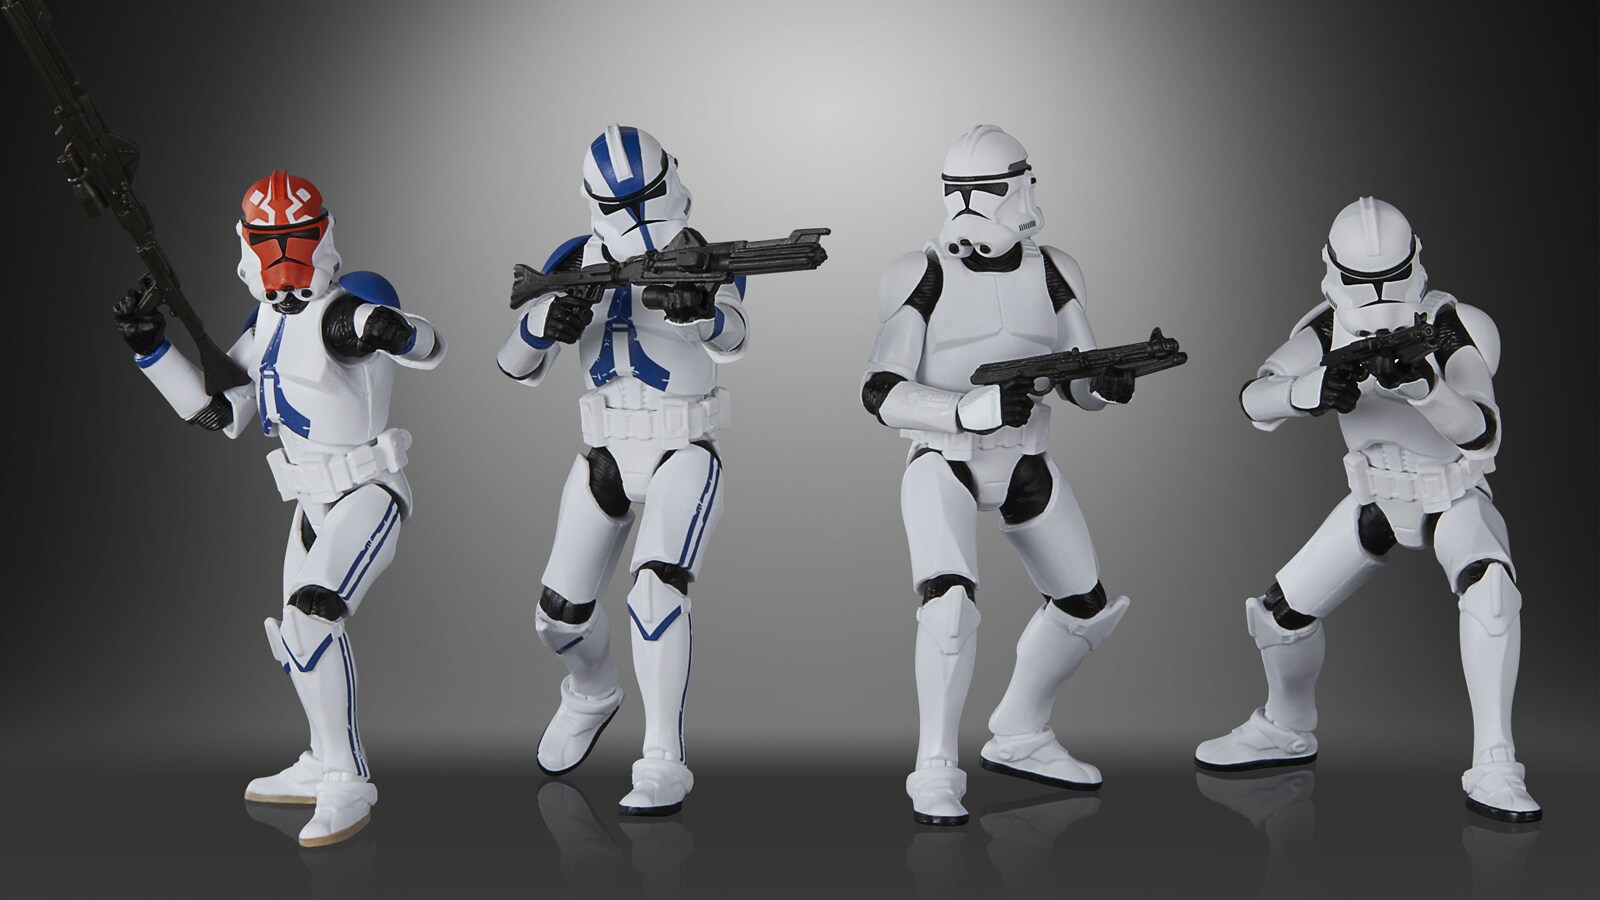 Gift the Galaxy: First Look at New Clone Trooper Figures